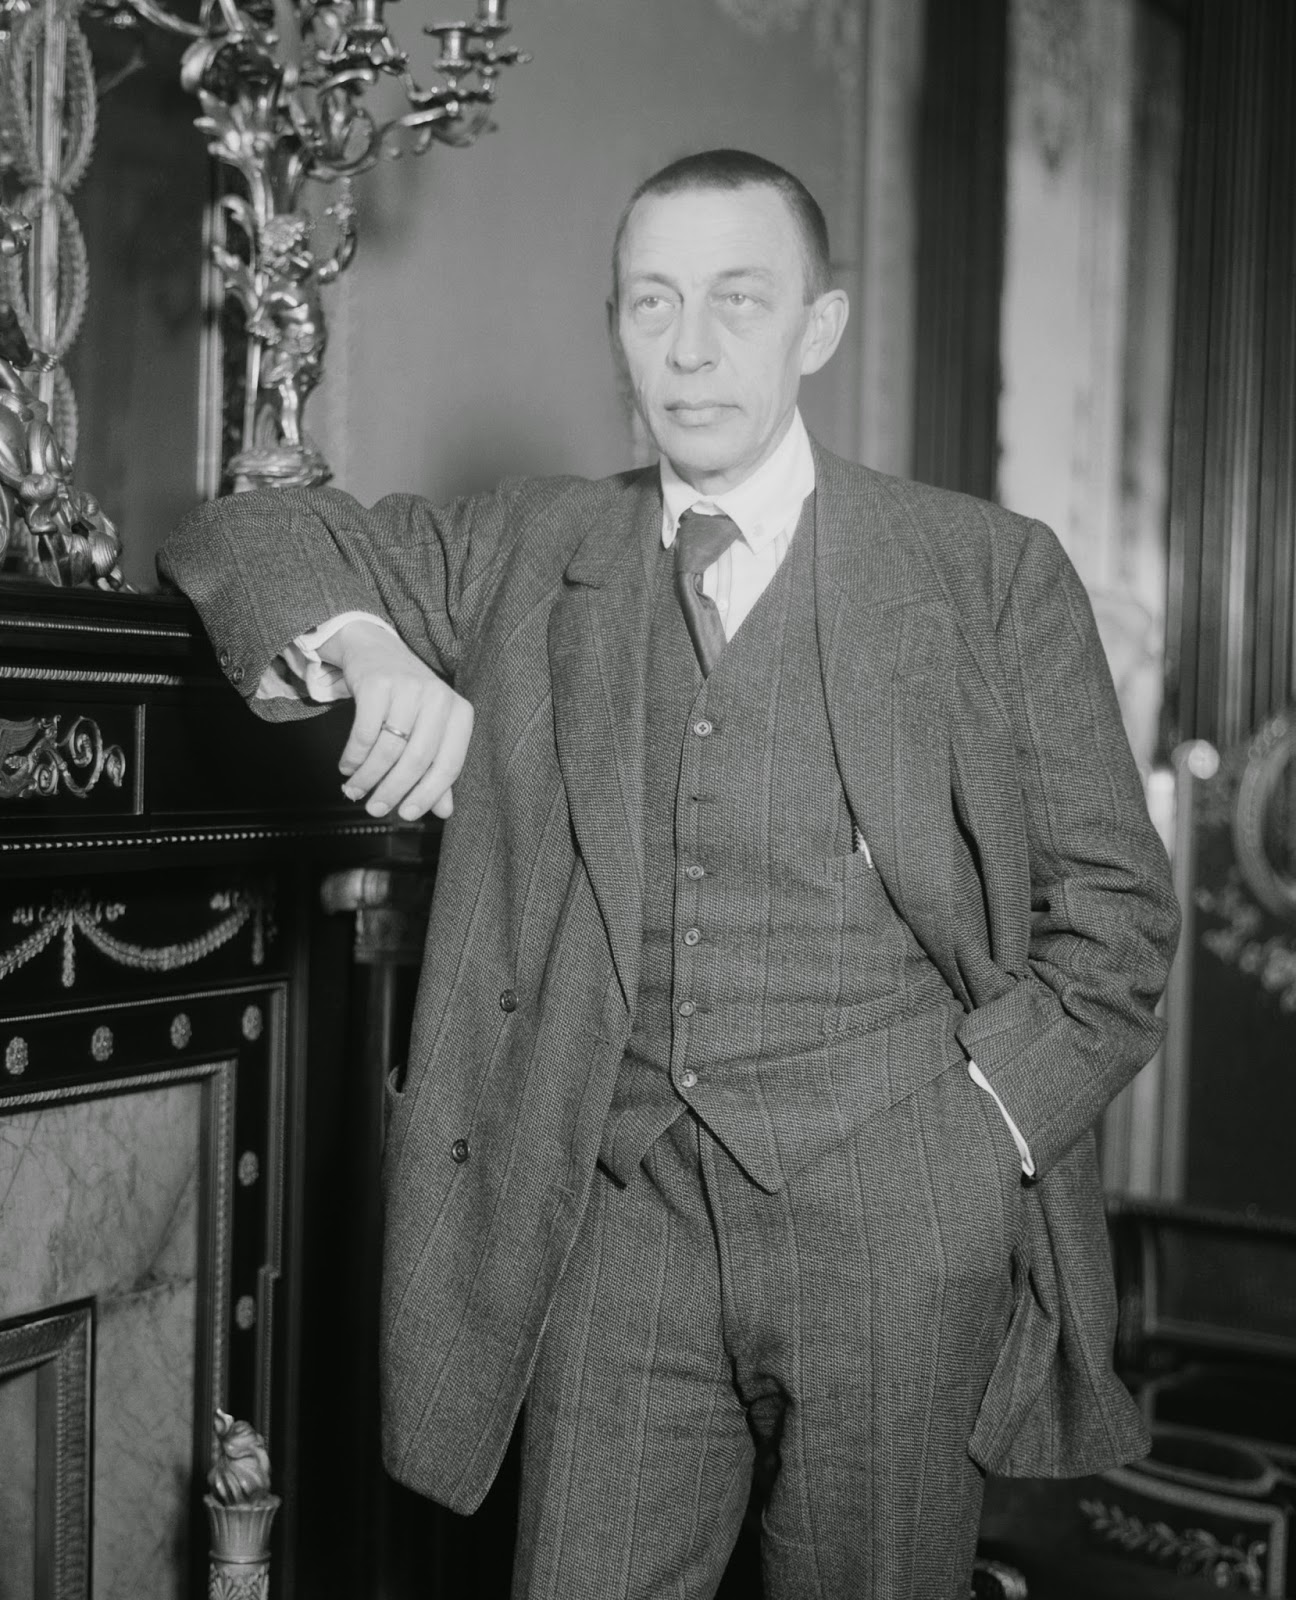 The 15 Greatest Classical Composers Of All Time - Sergei Rachmaninov (1873-1943)